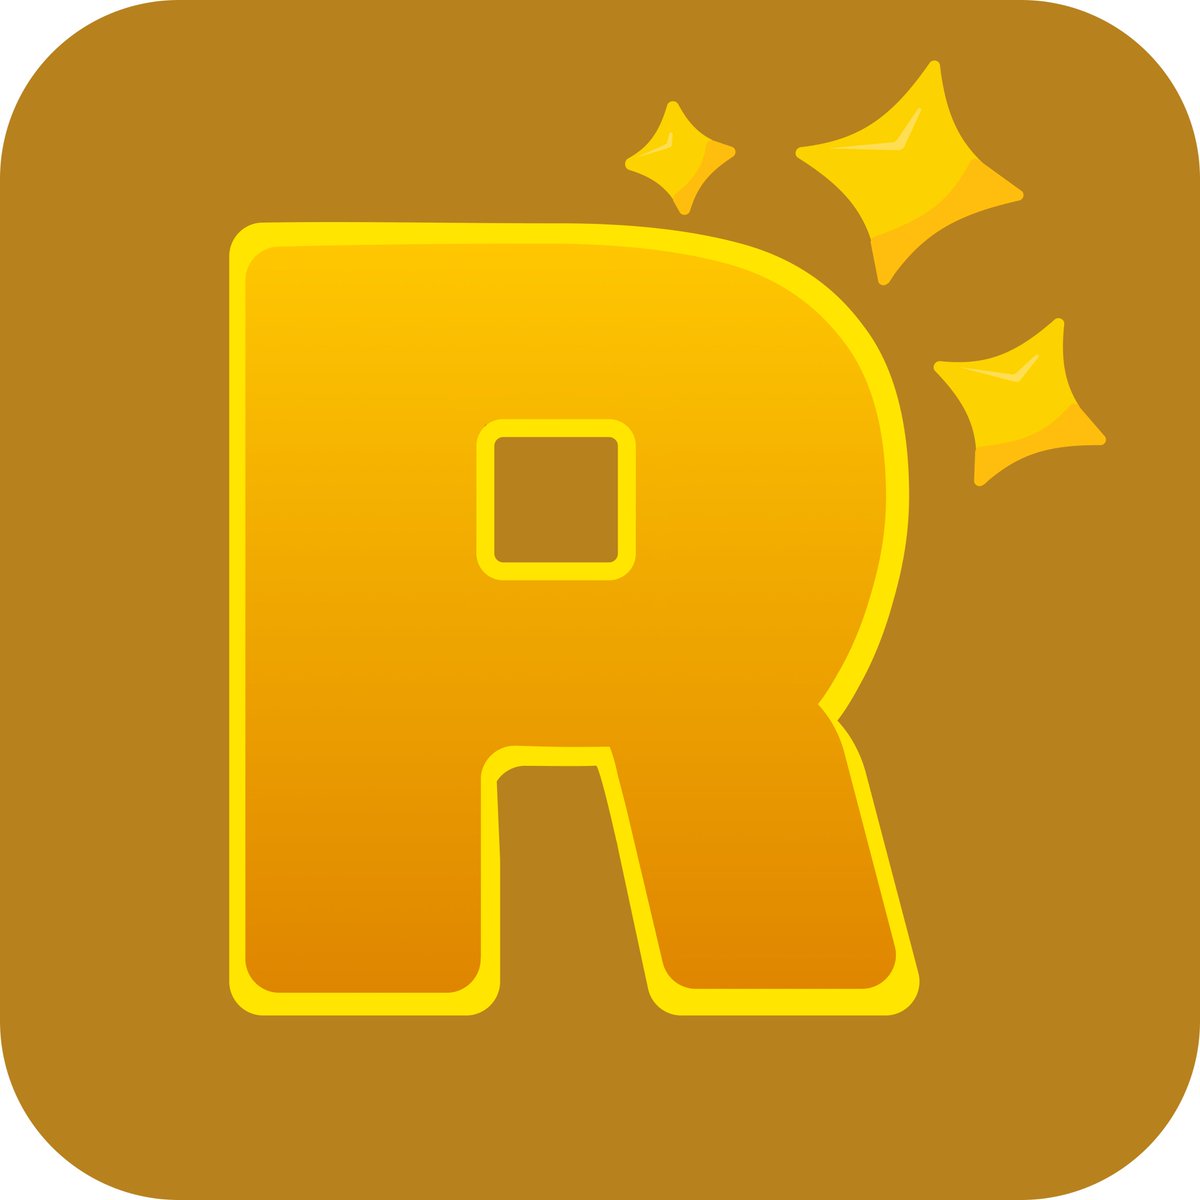 🎉🎉🎉GIVEAWAY TIME!!🎉🎉🎉
ROSHOP GOLD + 6969 ROGEMS (500 Robux)
How To Enter?
follow us
like this post

Extra:
Repost and Follow @ArtixRBLXfor extra chances at winning

disclaimer: redeemable only on Twitter, RoGems cannot be redeemed yet, please stay patient for RoShop Rewards